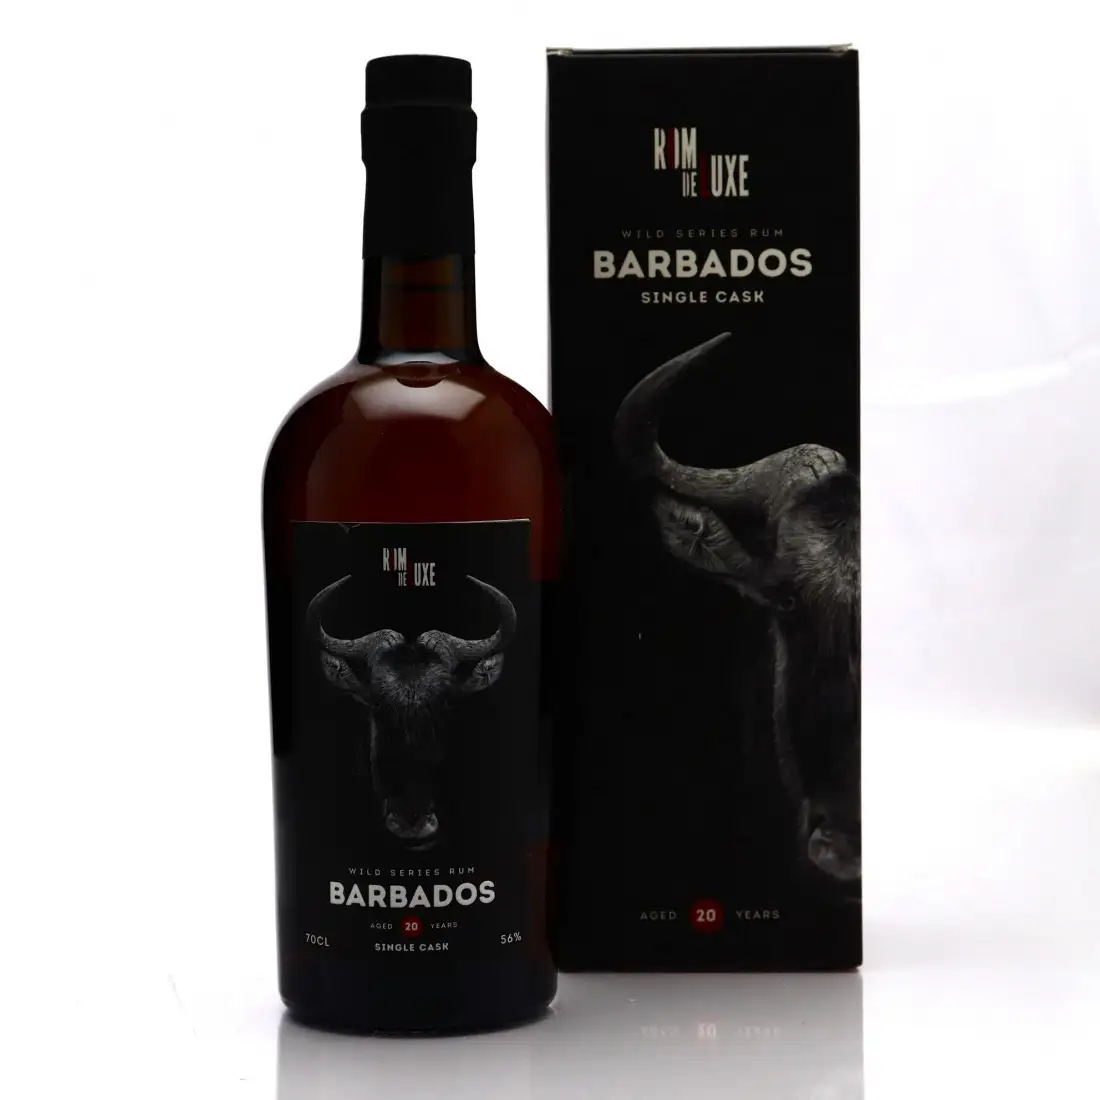 Image of the front of the bottle of the rum Wild Series Rum Barbados No. 22 (Unicorn Set Vol 1) BMMG